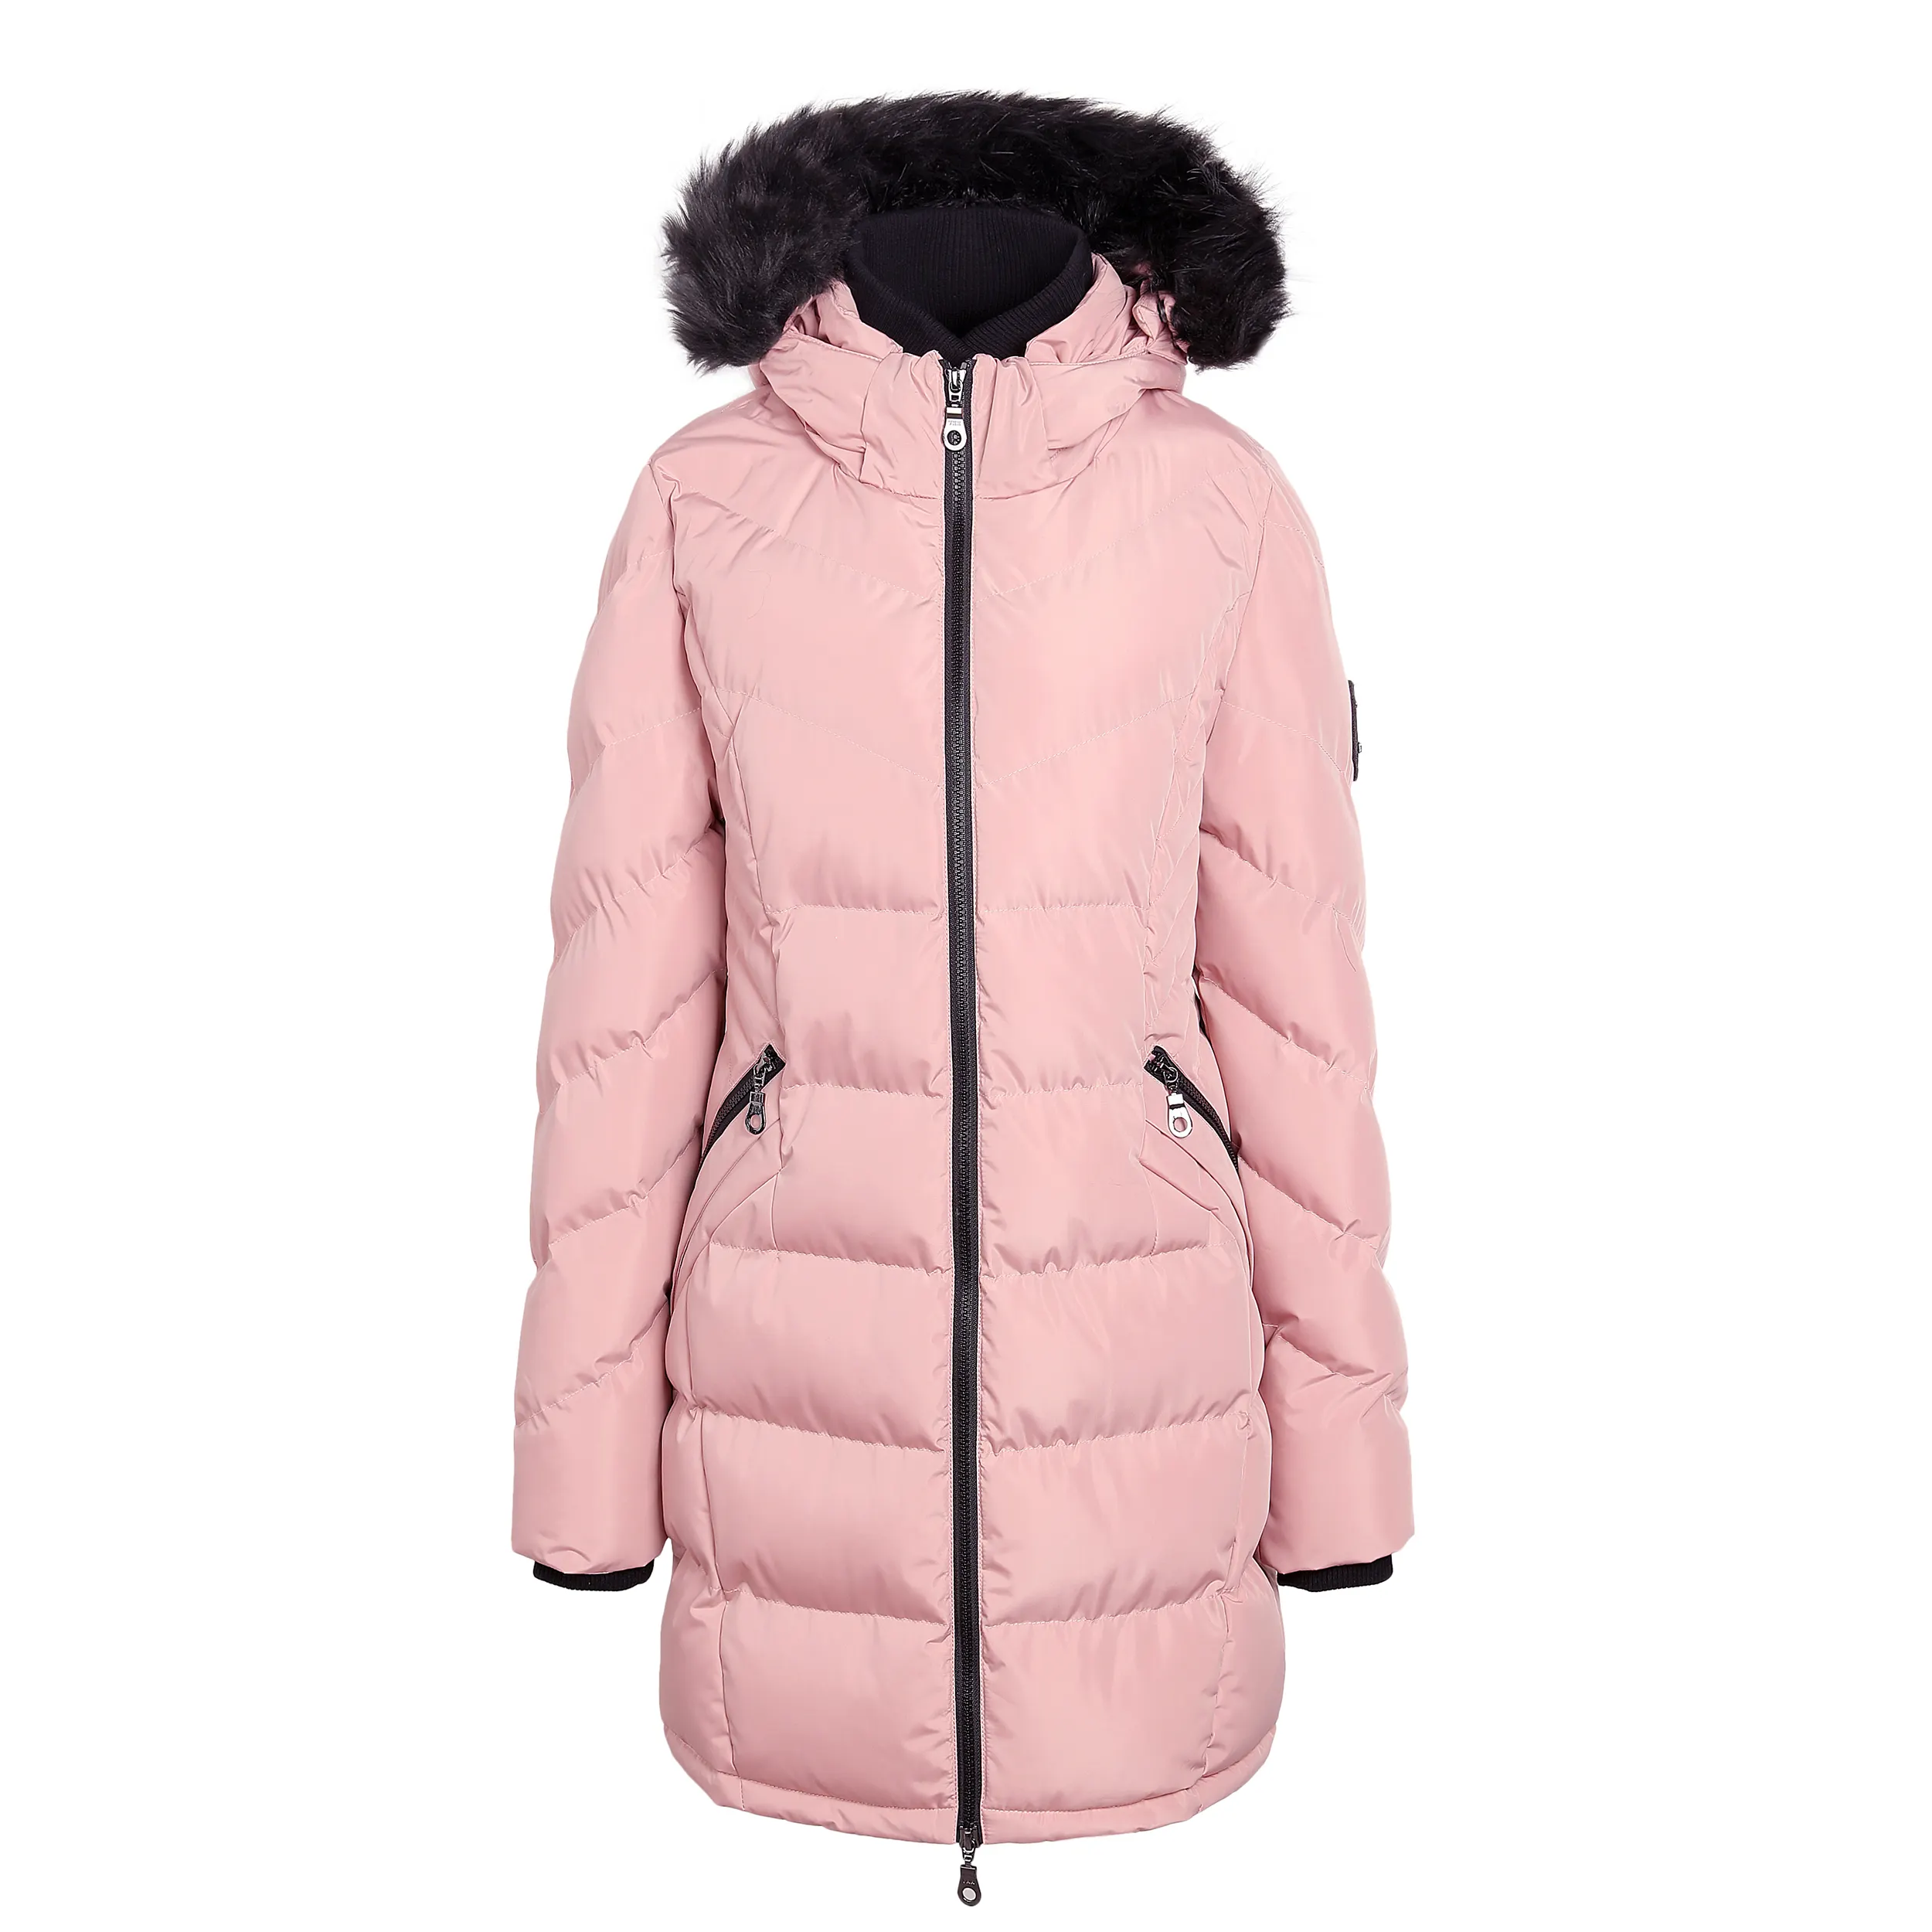 New Fashionable Lightweight Men Puffer Padded Jacket Hooded Thin Down Cotton Coat Zipper Fly Multicolor Bubble Jacket Plus Size